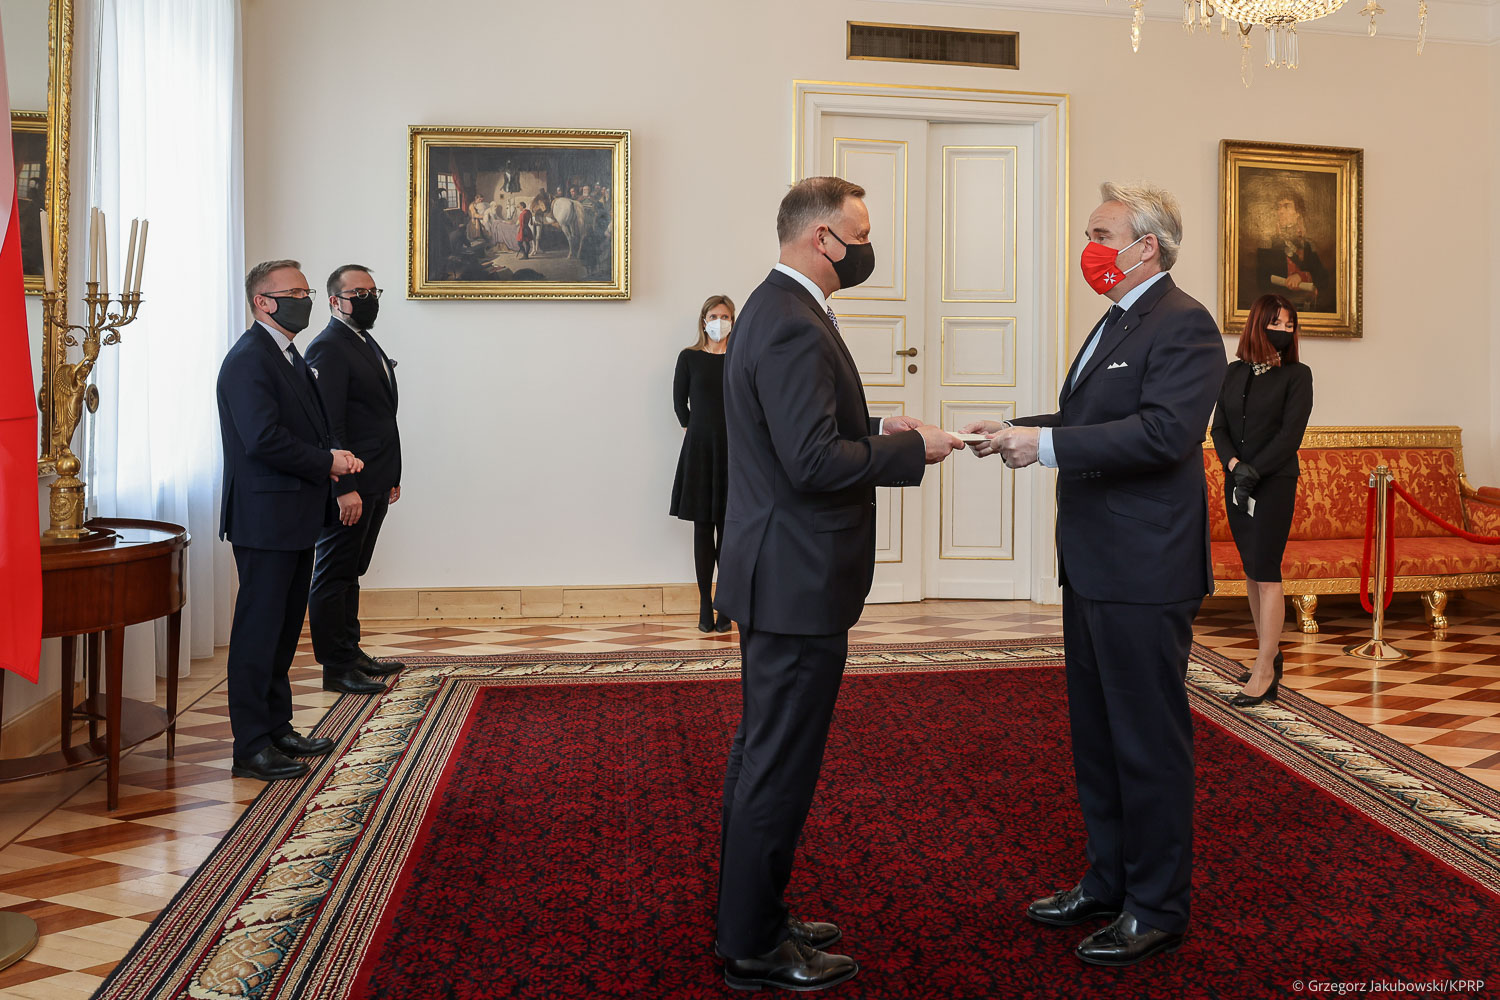 The Ambassador of the Sovereign Order of Malta to Poland presents his letters of credence